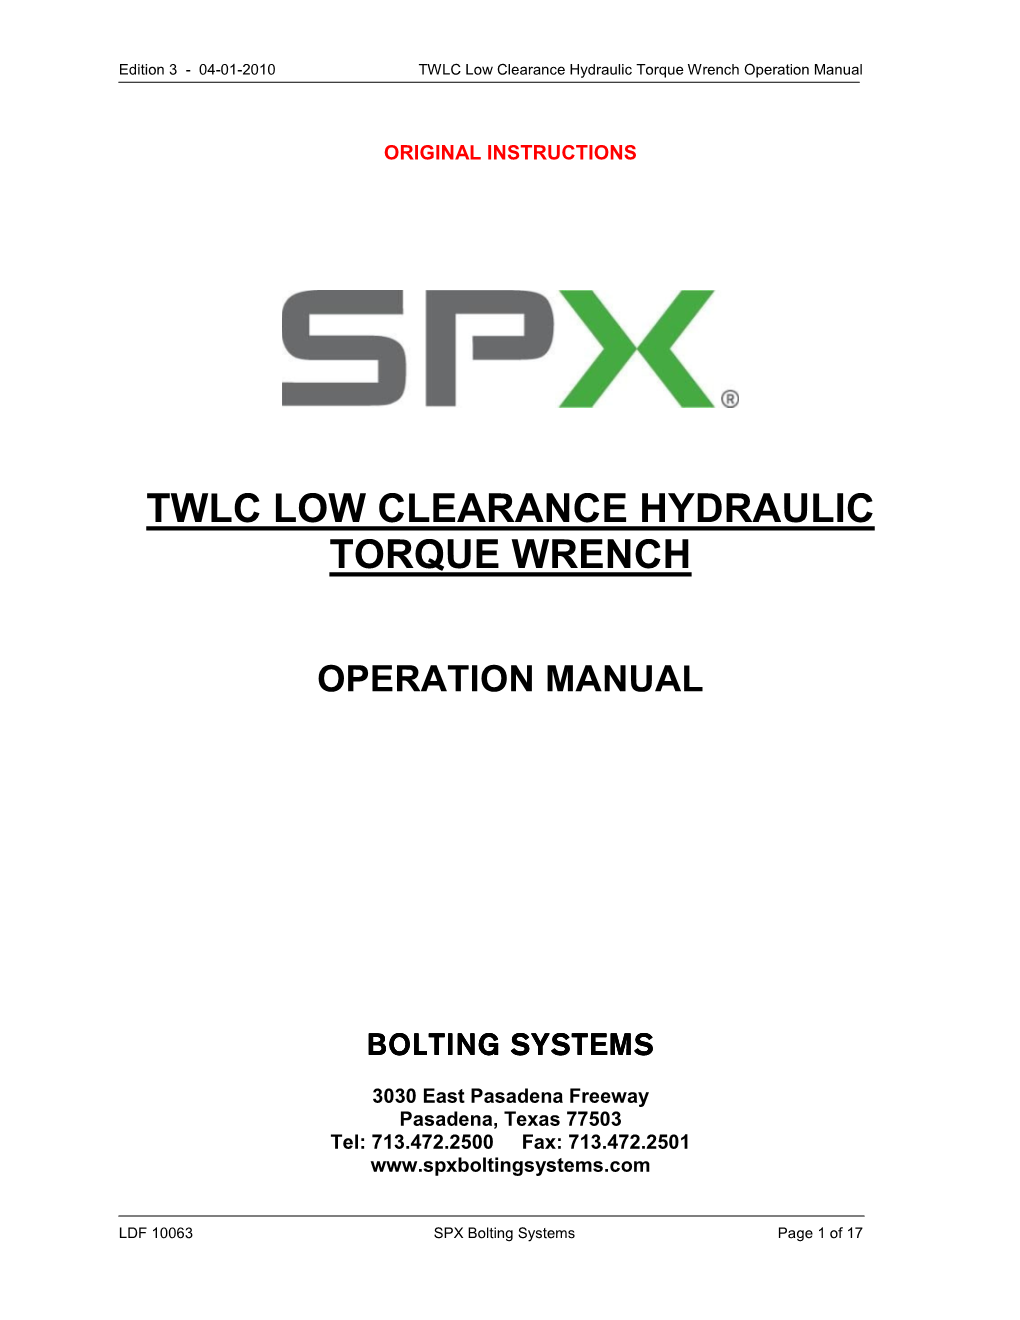 TWLC Low Clearance Hydraulic Torque Wrench Operation Manual